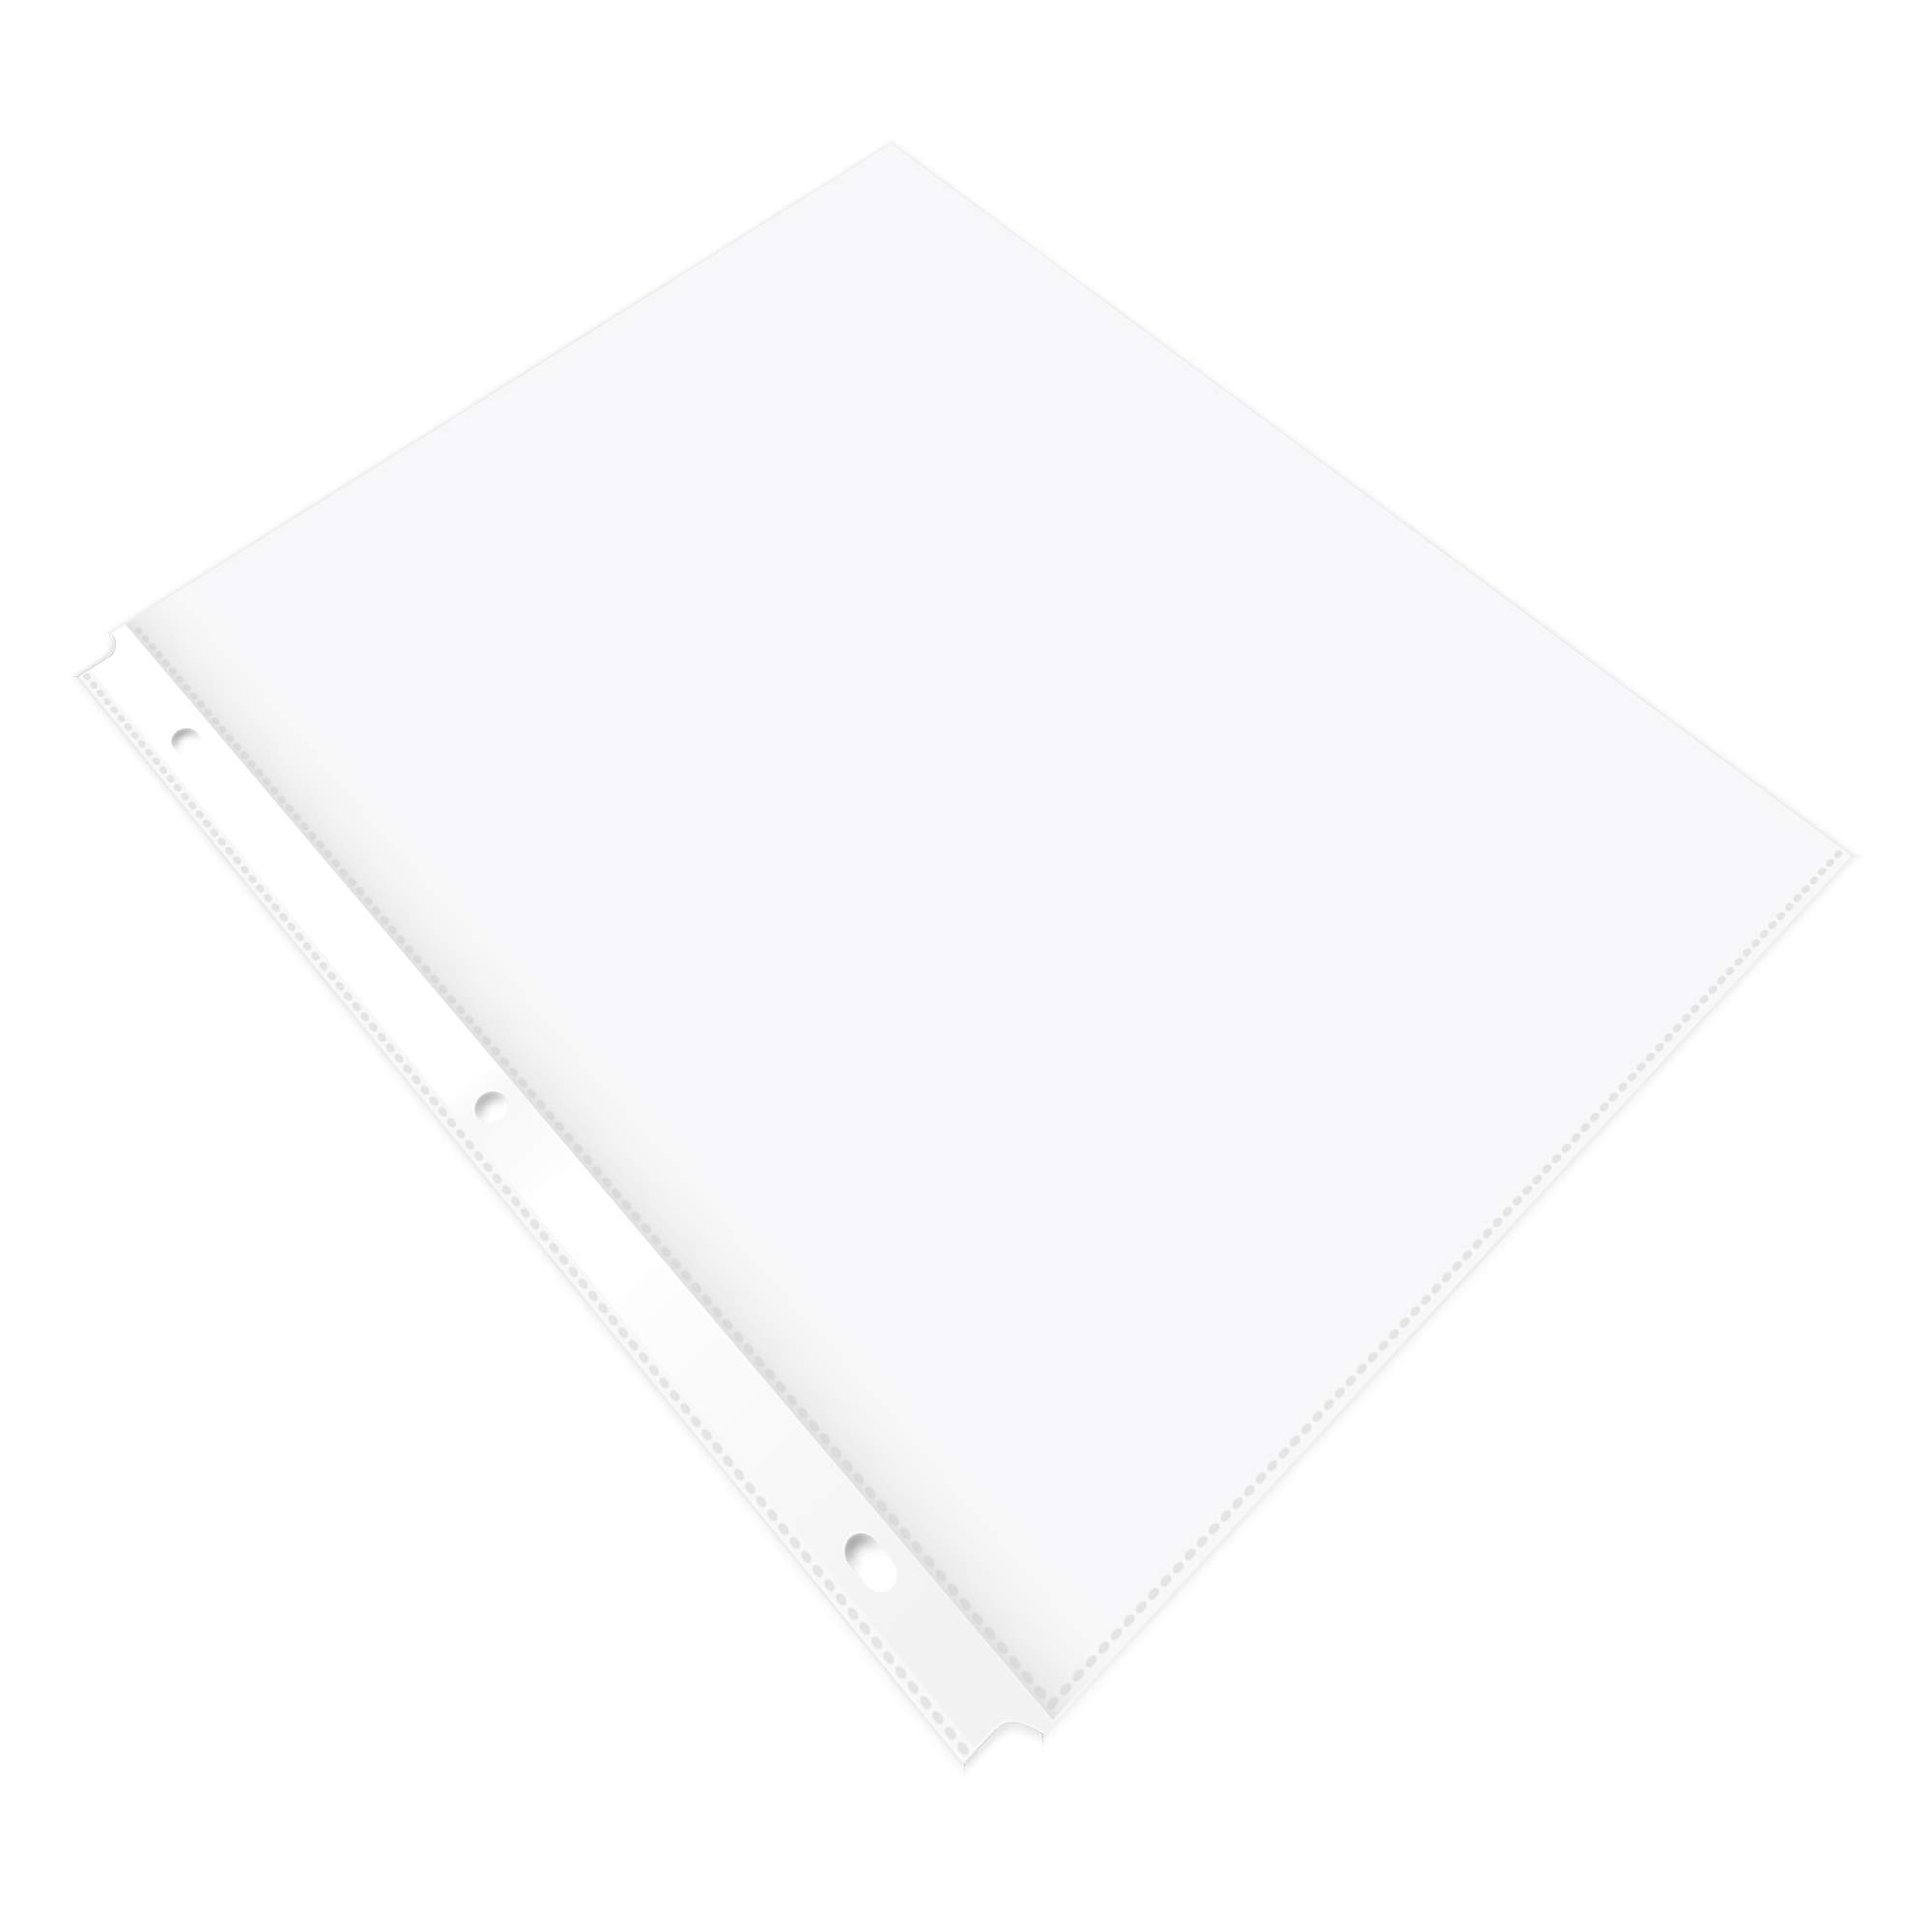 AmazonBasics Clear Sheet Protectors for 3 Ring Binder, 8.5 x 11inch, 3 holes, 200 Pack